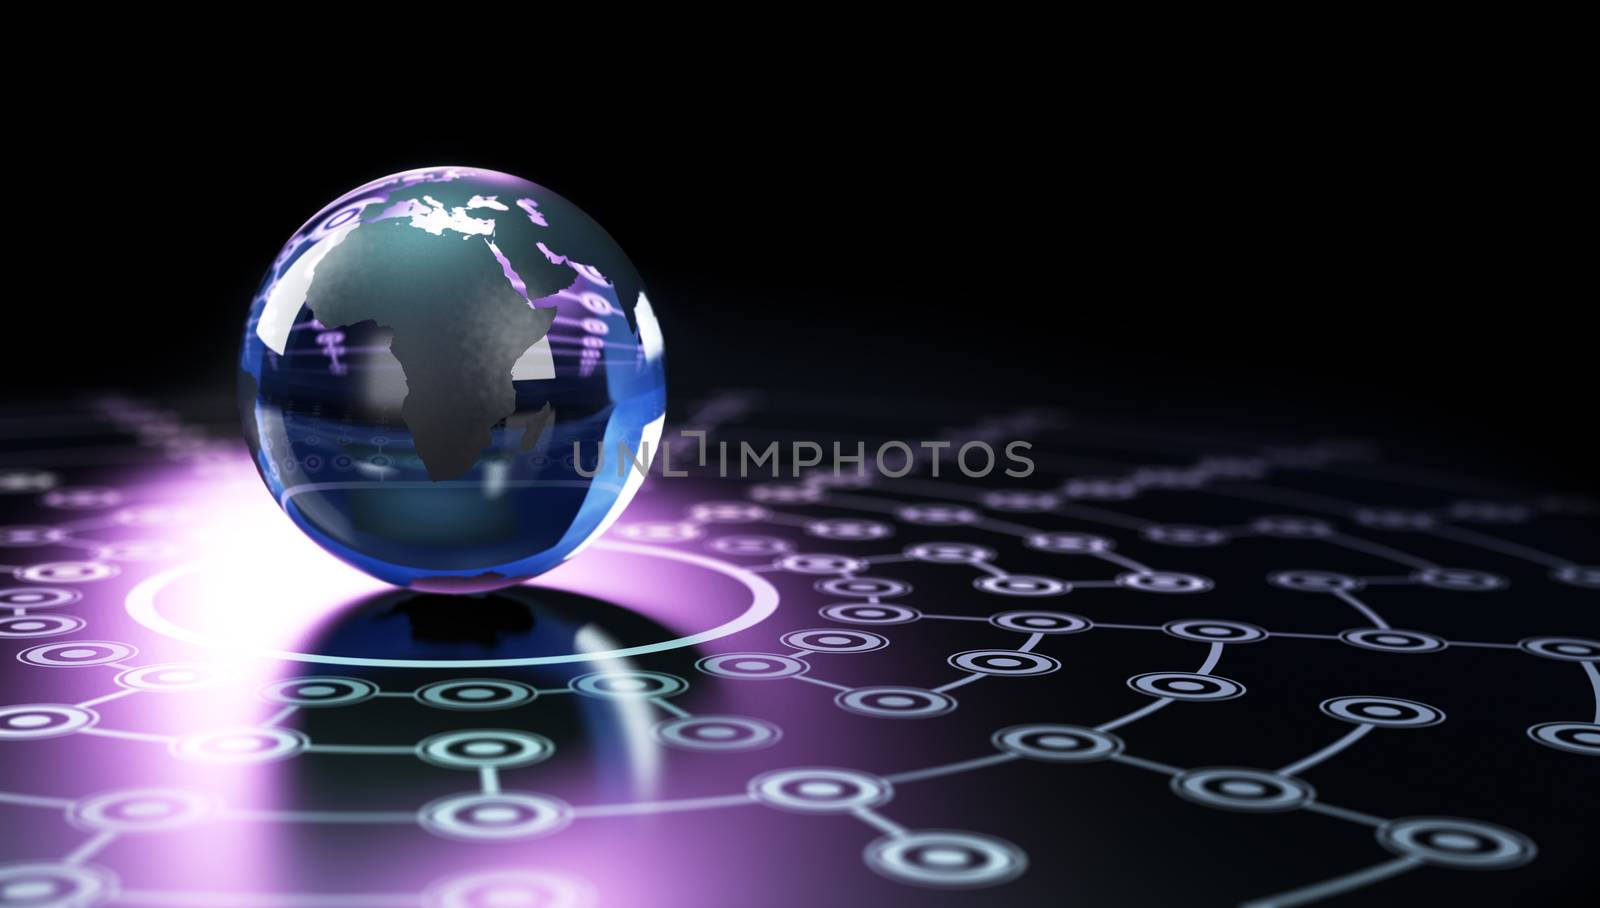 World sphere made in glass over a network with blur effect. Image is blue and purple toned and over black background